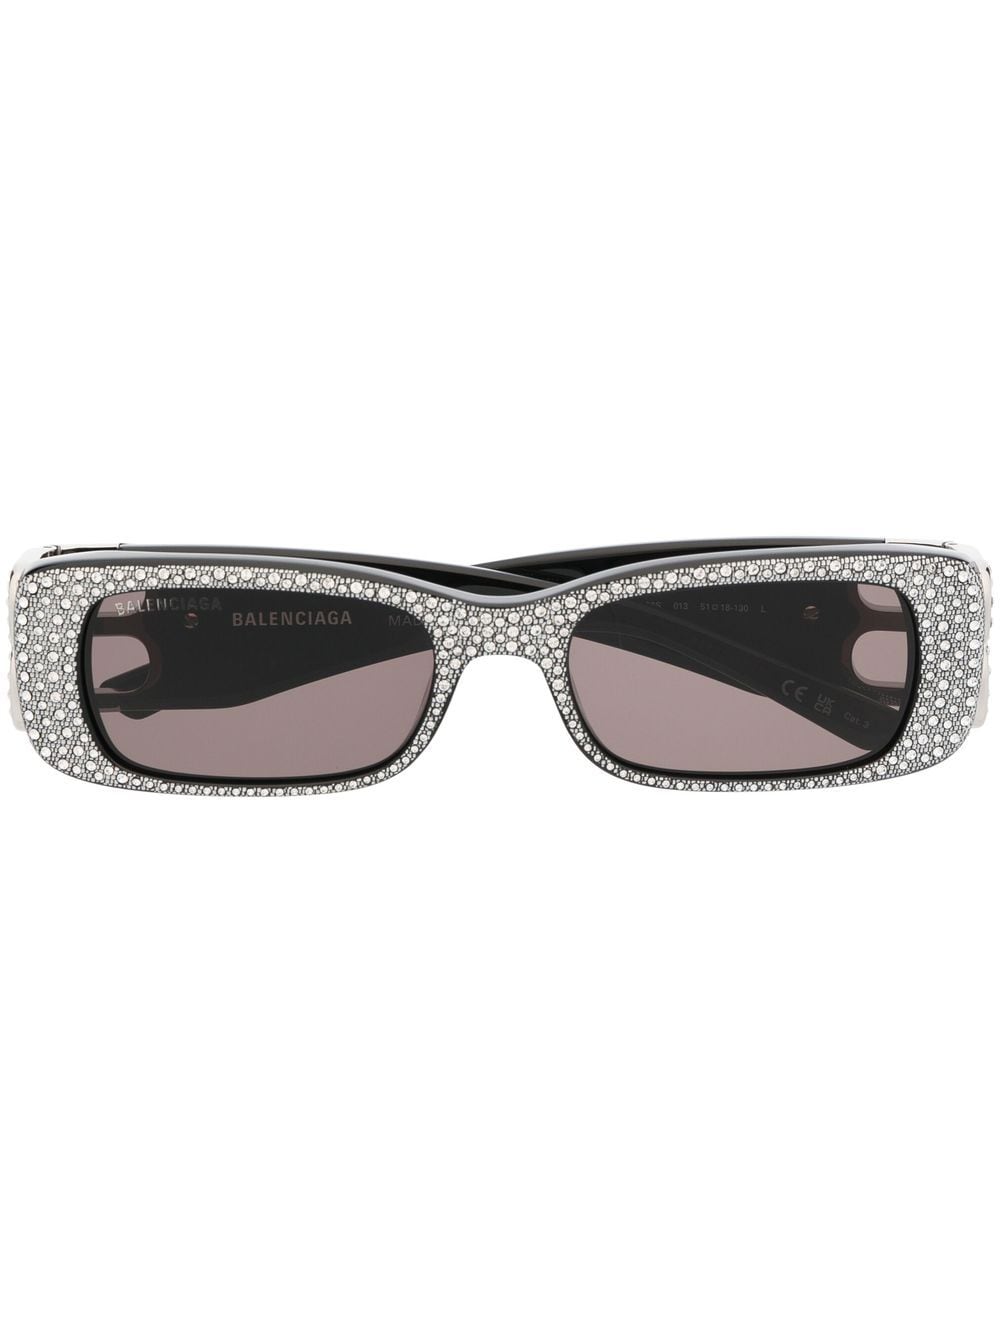 Dynasty rectangle frame sunglasses Profile Picture